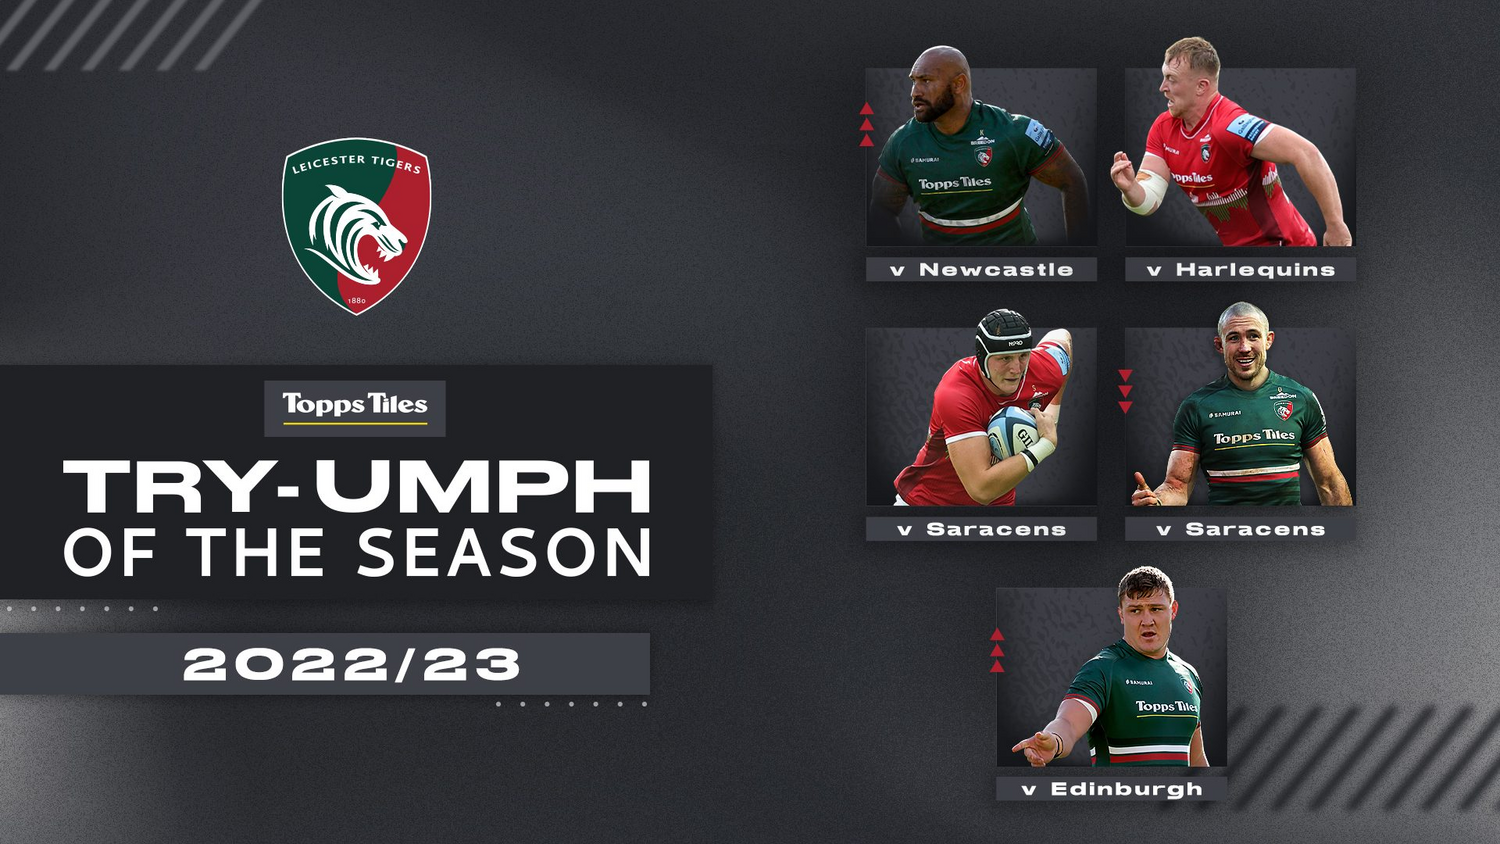 Topps Tiles try-umph of the season Leicester Tigers